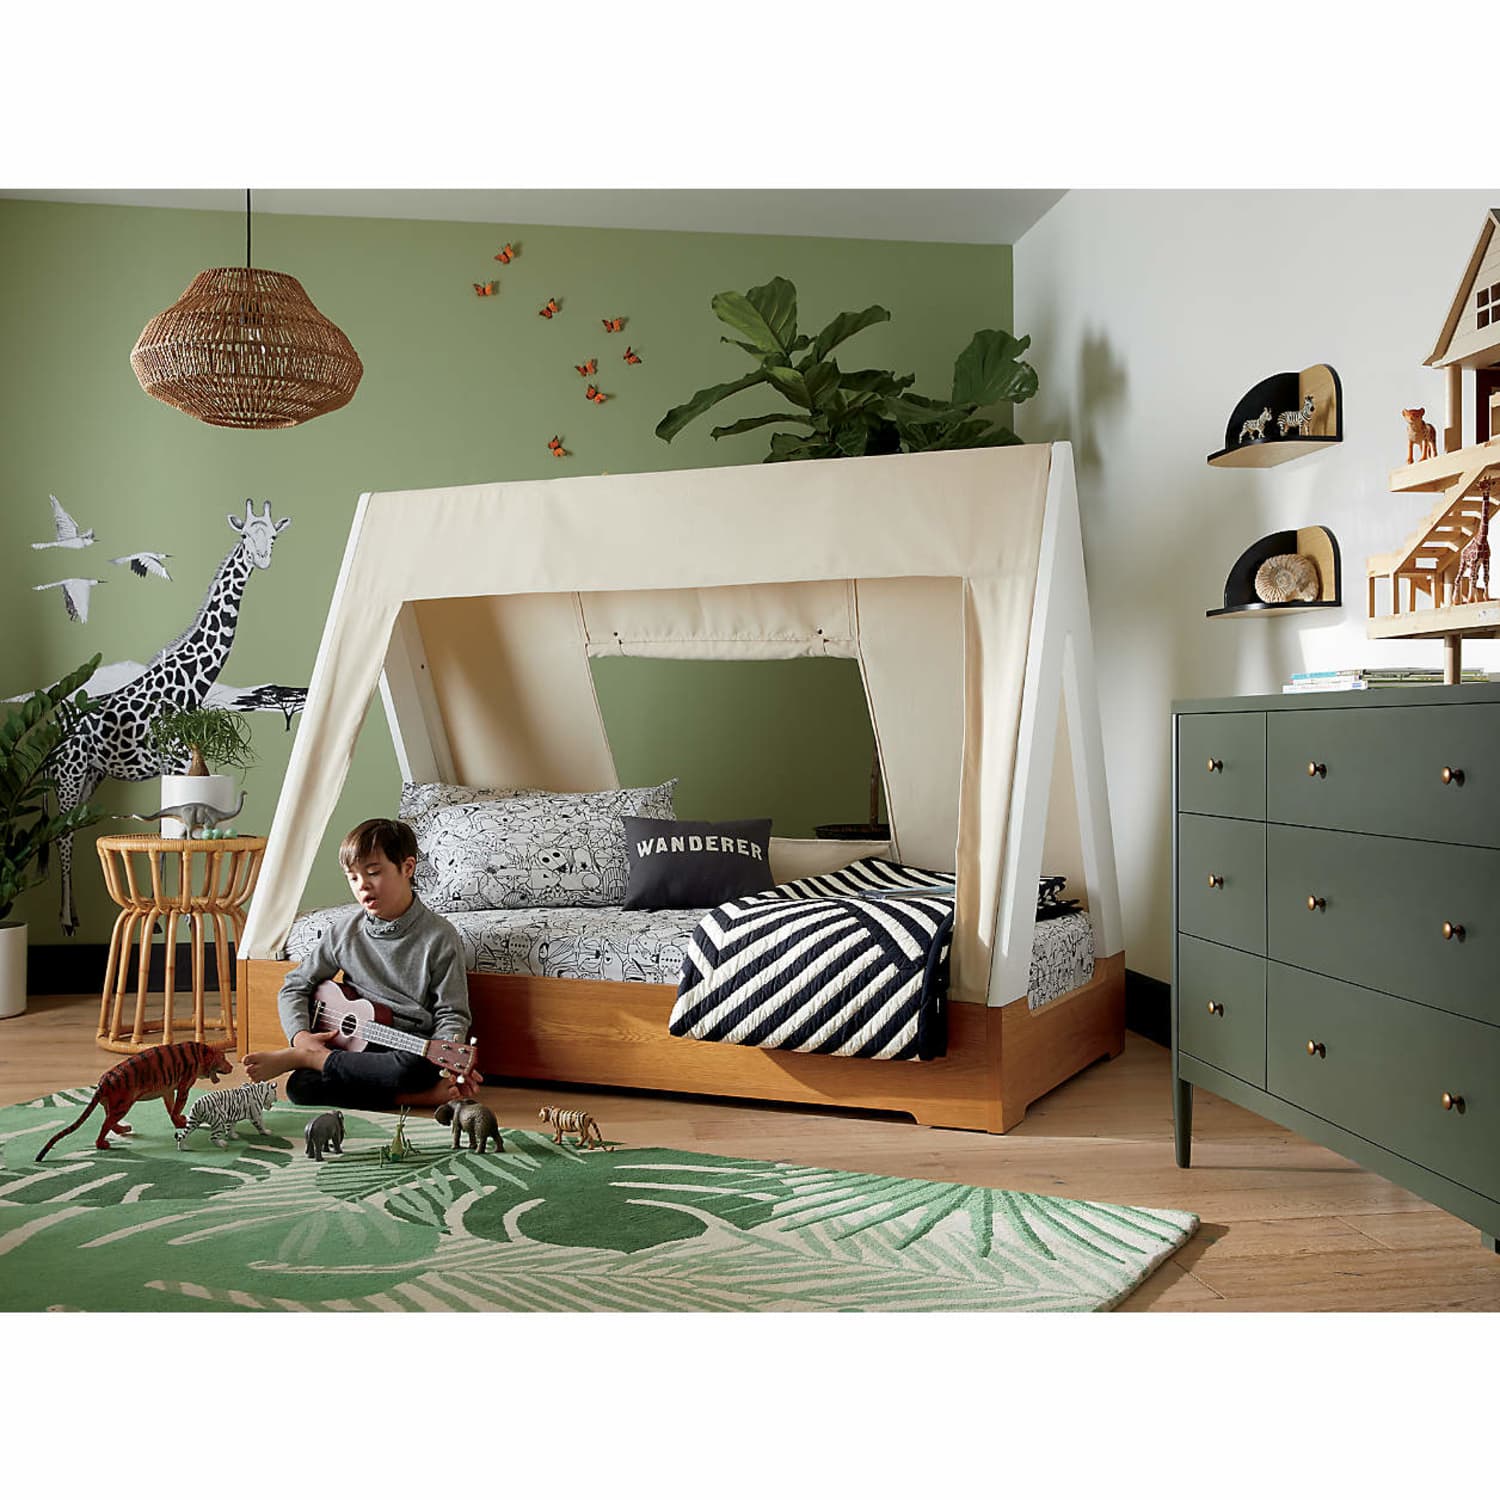 9 Tent Beds for Kids Who Dream of Sleeping Under the Stars